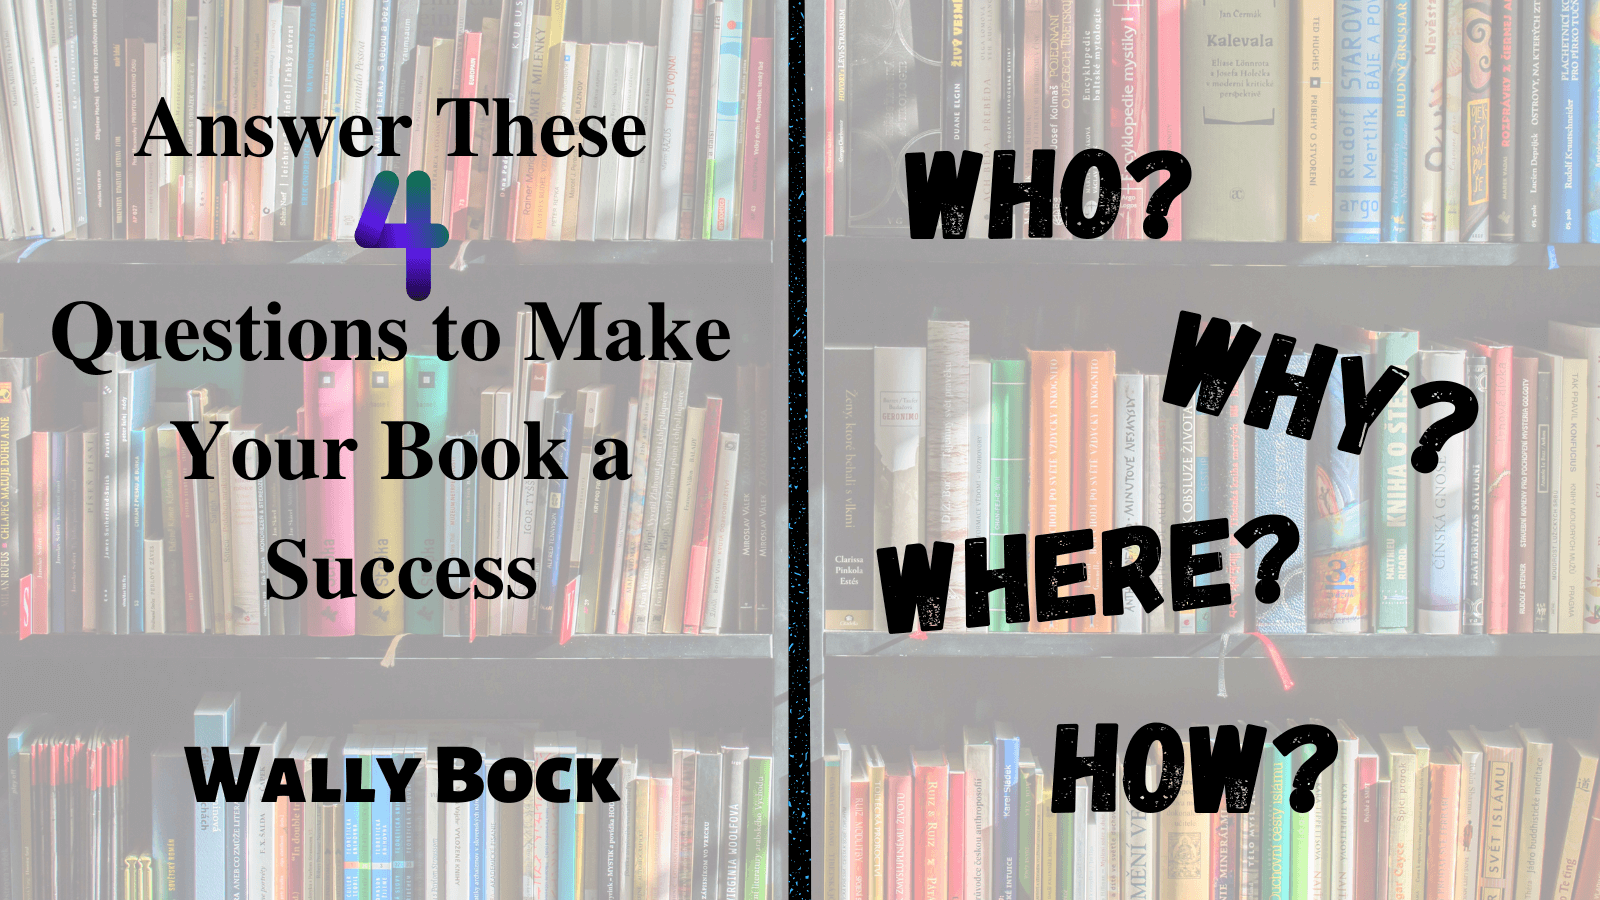 Answer these 4 questions to make your book a success